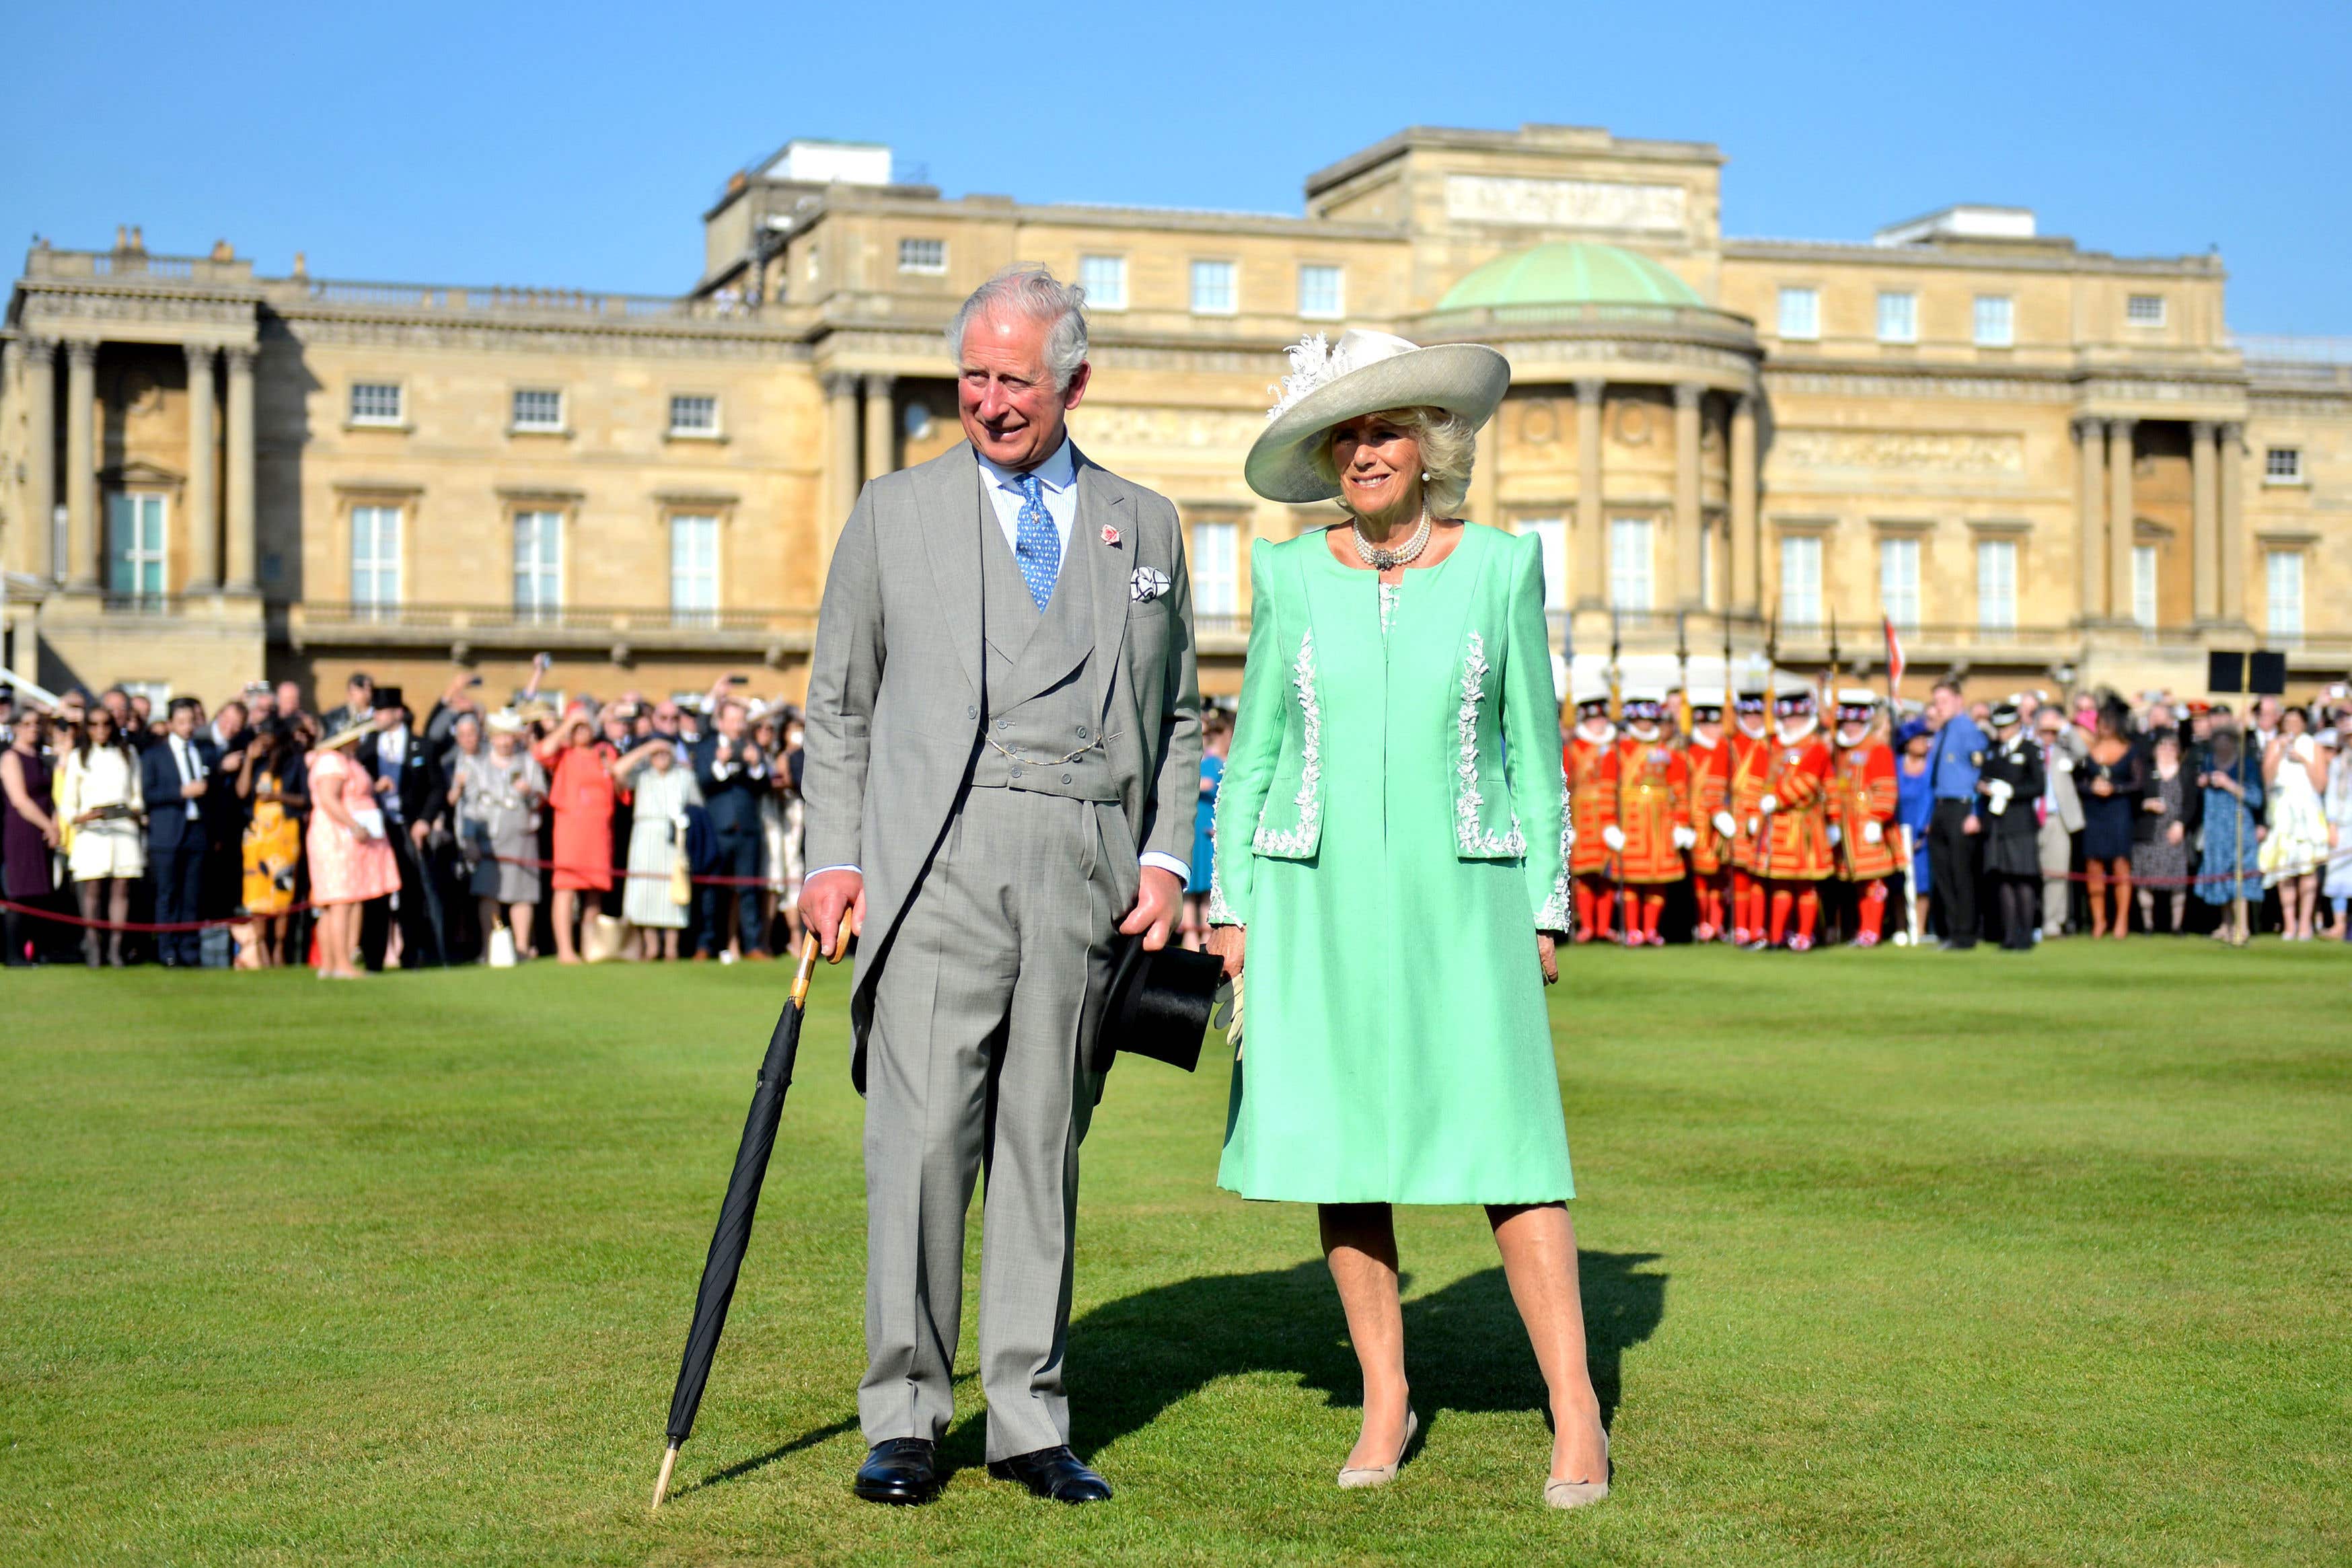 King's garden parties to celebrate coronation announced by Palace